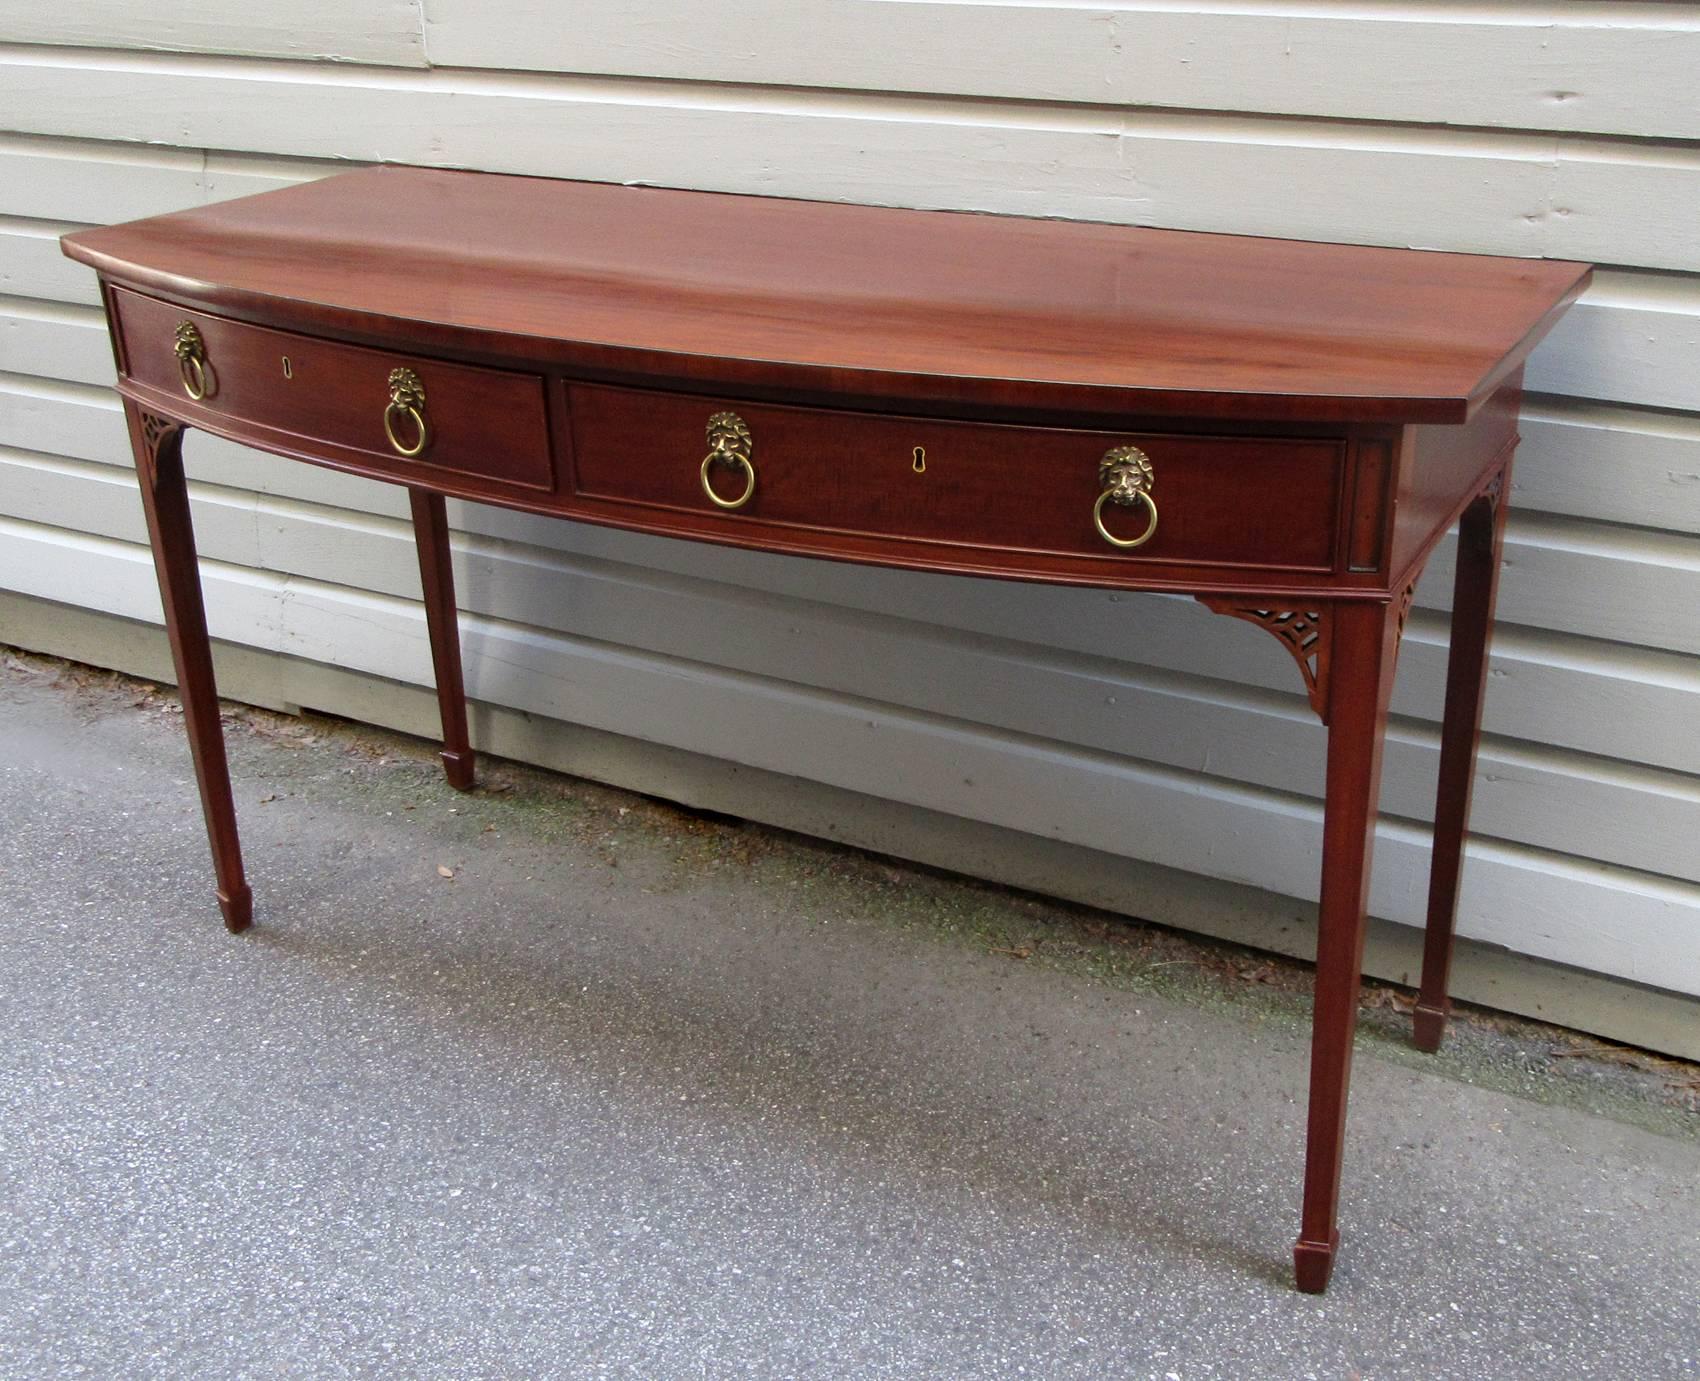 Regency Early 19th Century English Georgian Mahogany Two-Drawer Serving Table with Stamp